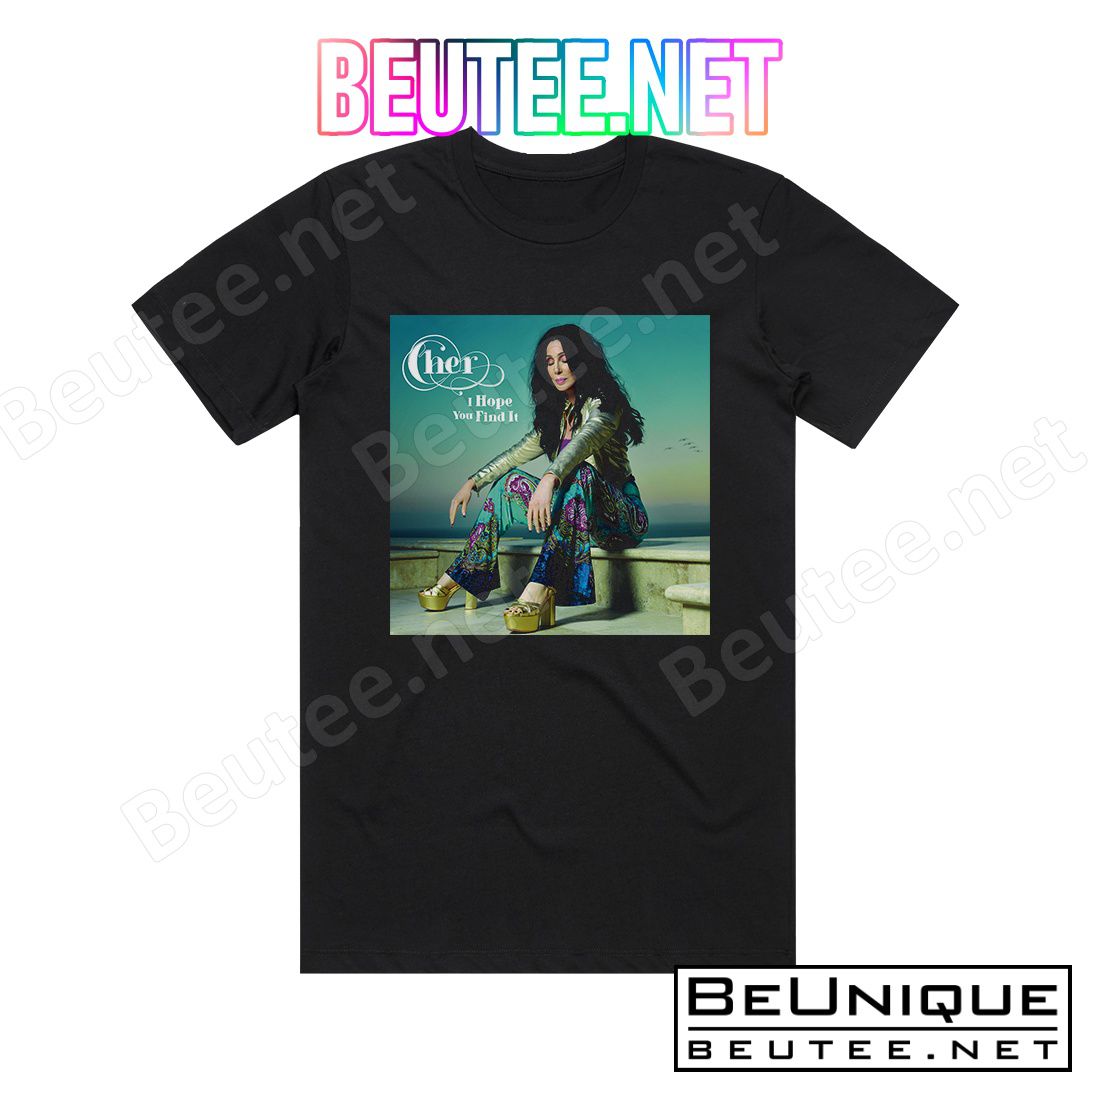 Cher I Hope You Find It Album Cover T-Shirt